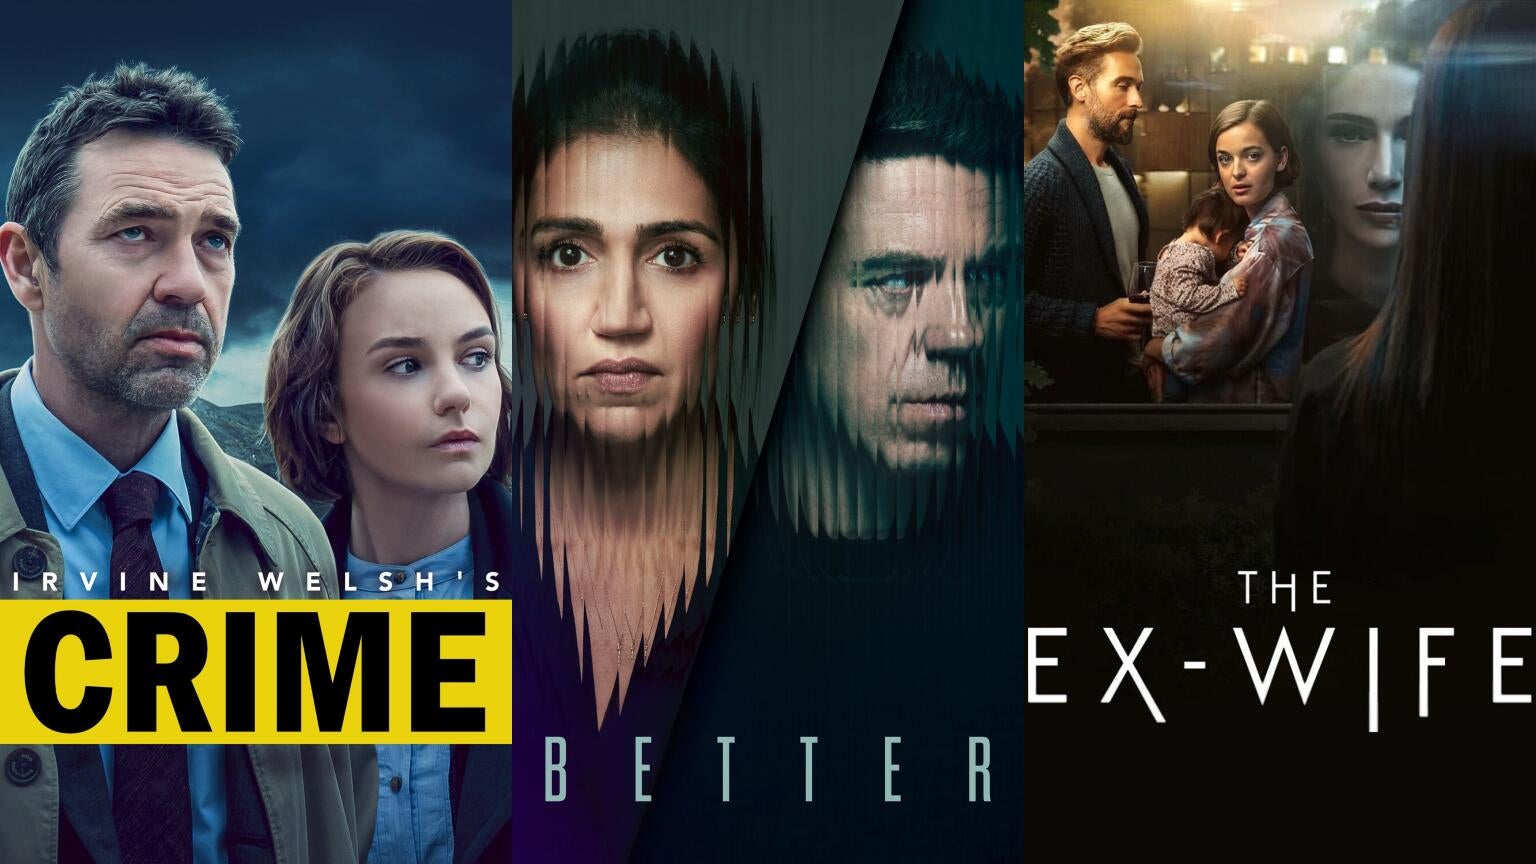 Posters for Irvine Welsh's "Crime," "Better," and "The Ex-Wife"